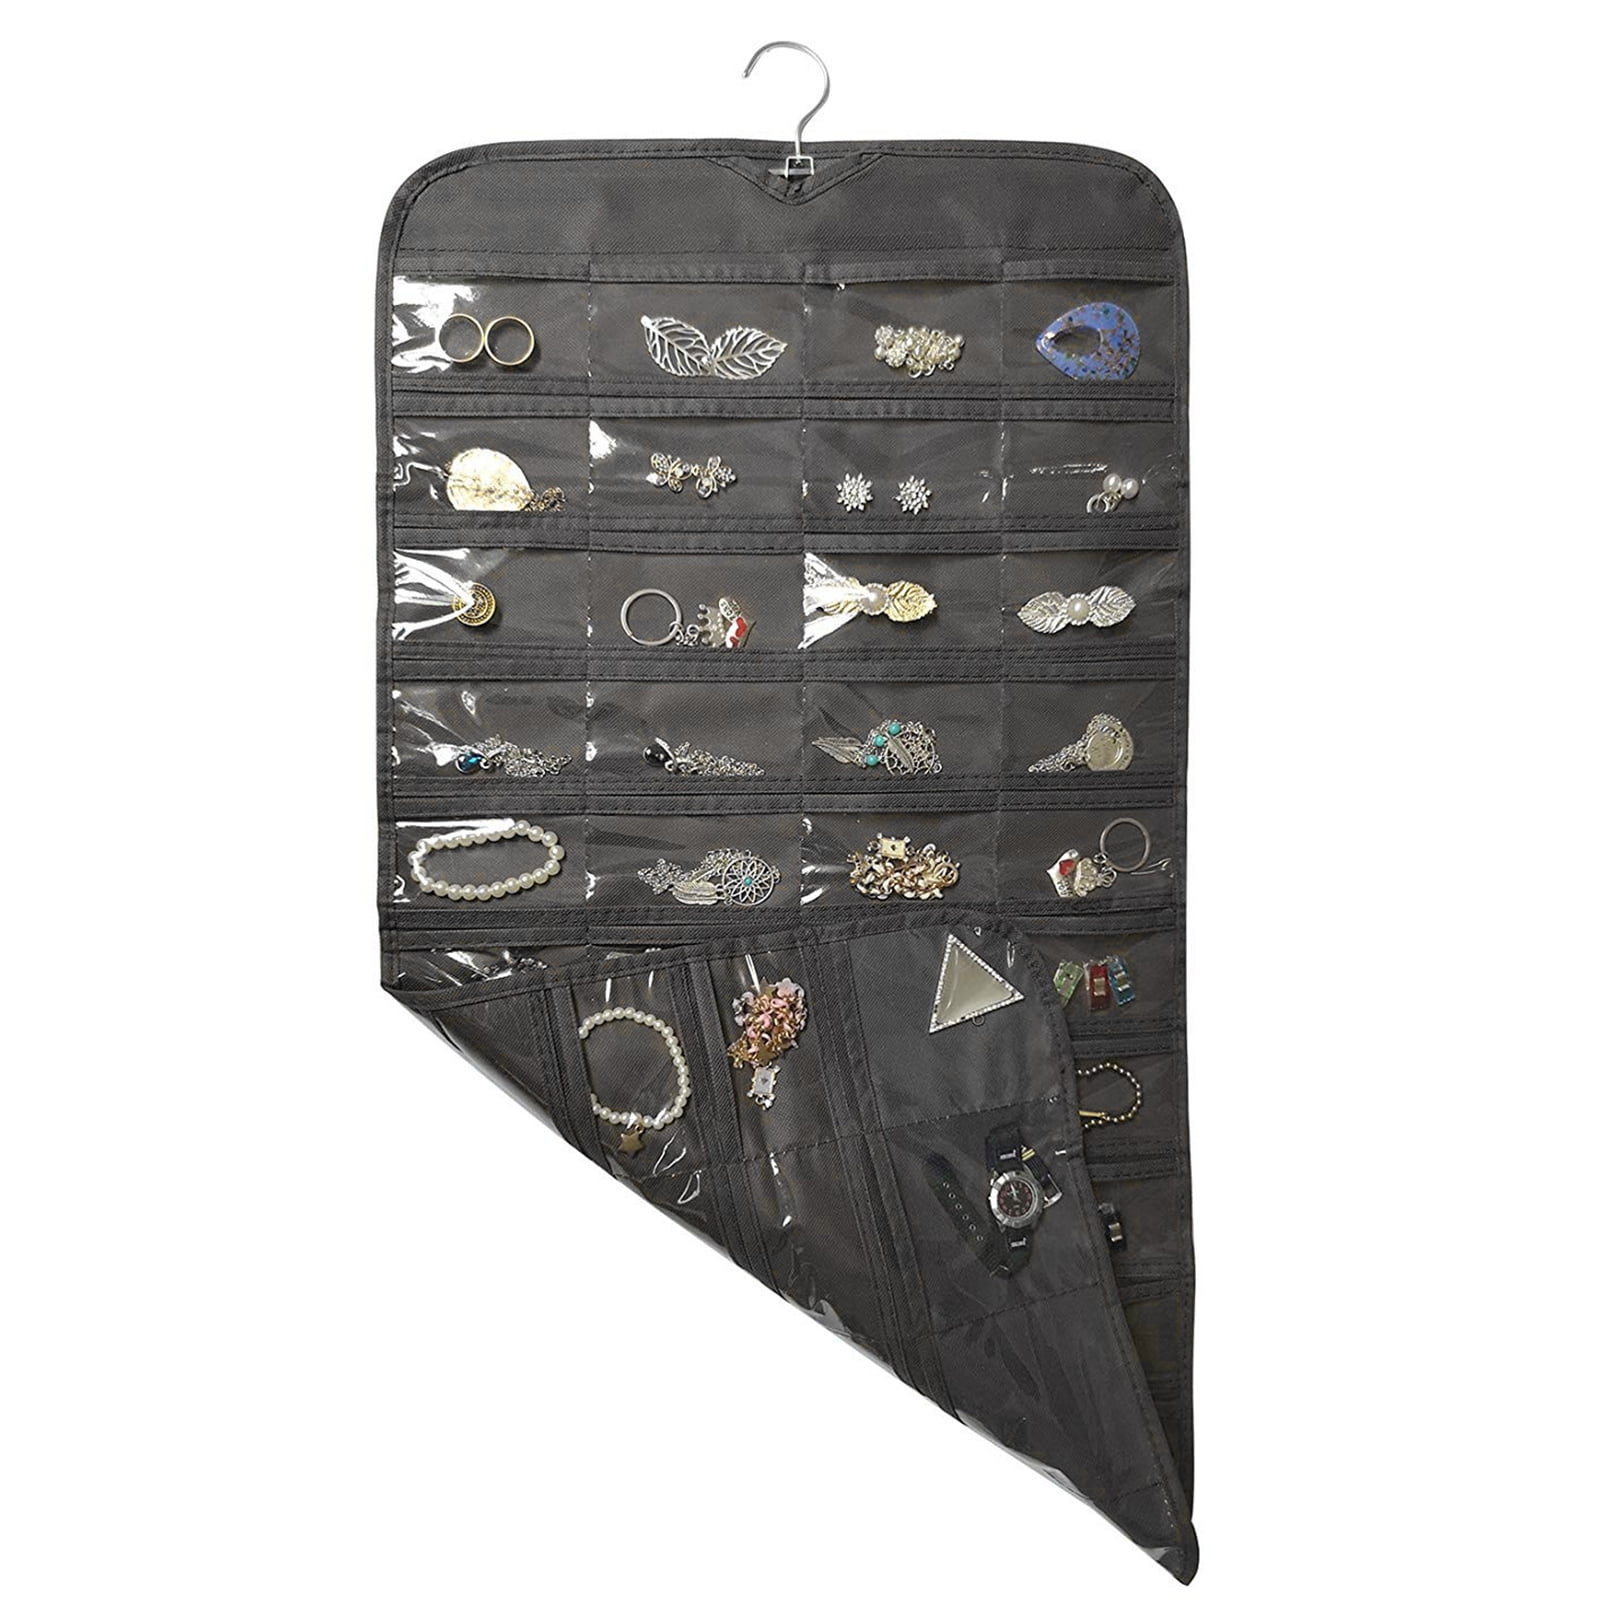 Details about   Jewelry Hanging Storage Bags Earring Display Organizer Holder Pouch 72-Pocket 